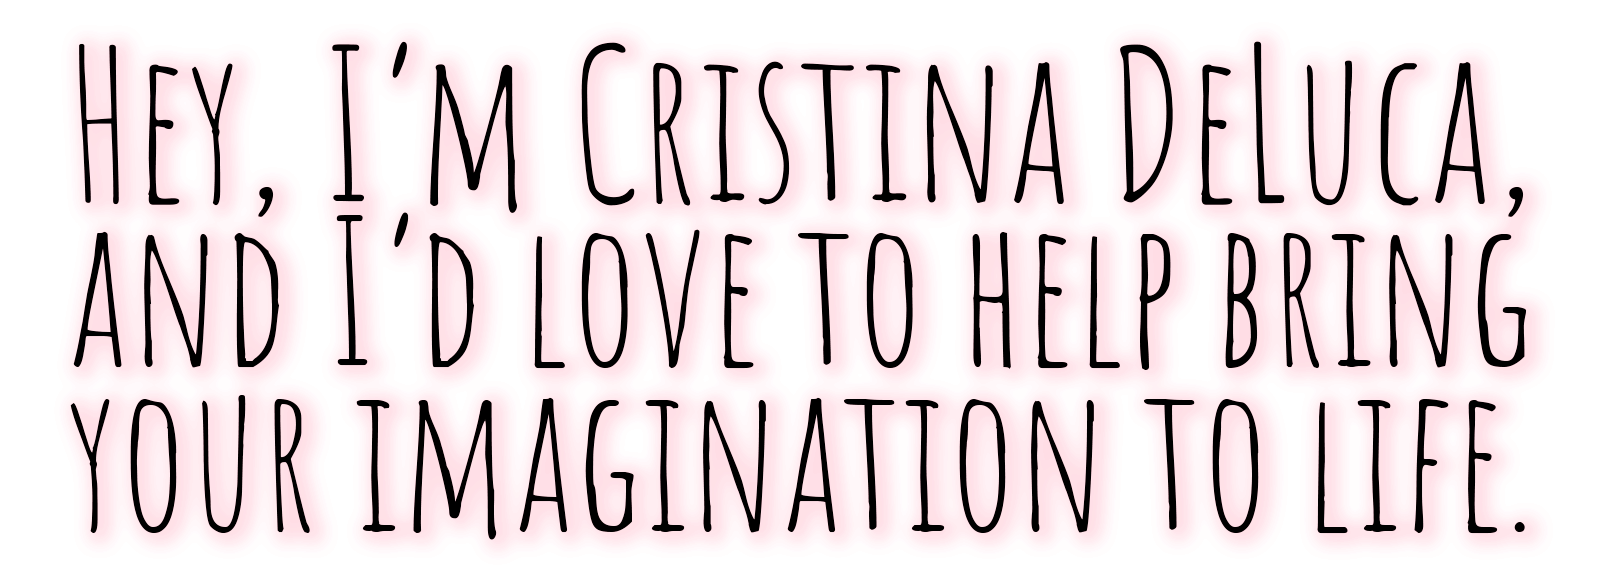 Hey, I'm Cristina DeLuca, and I'd love to bring your imagination to life.